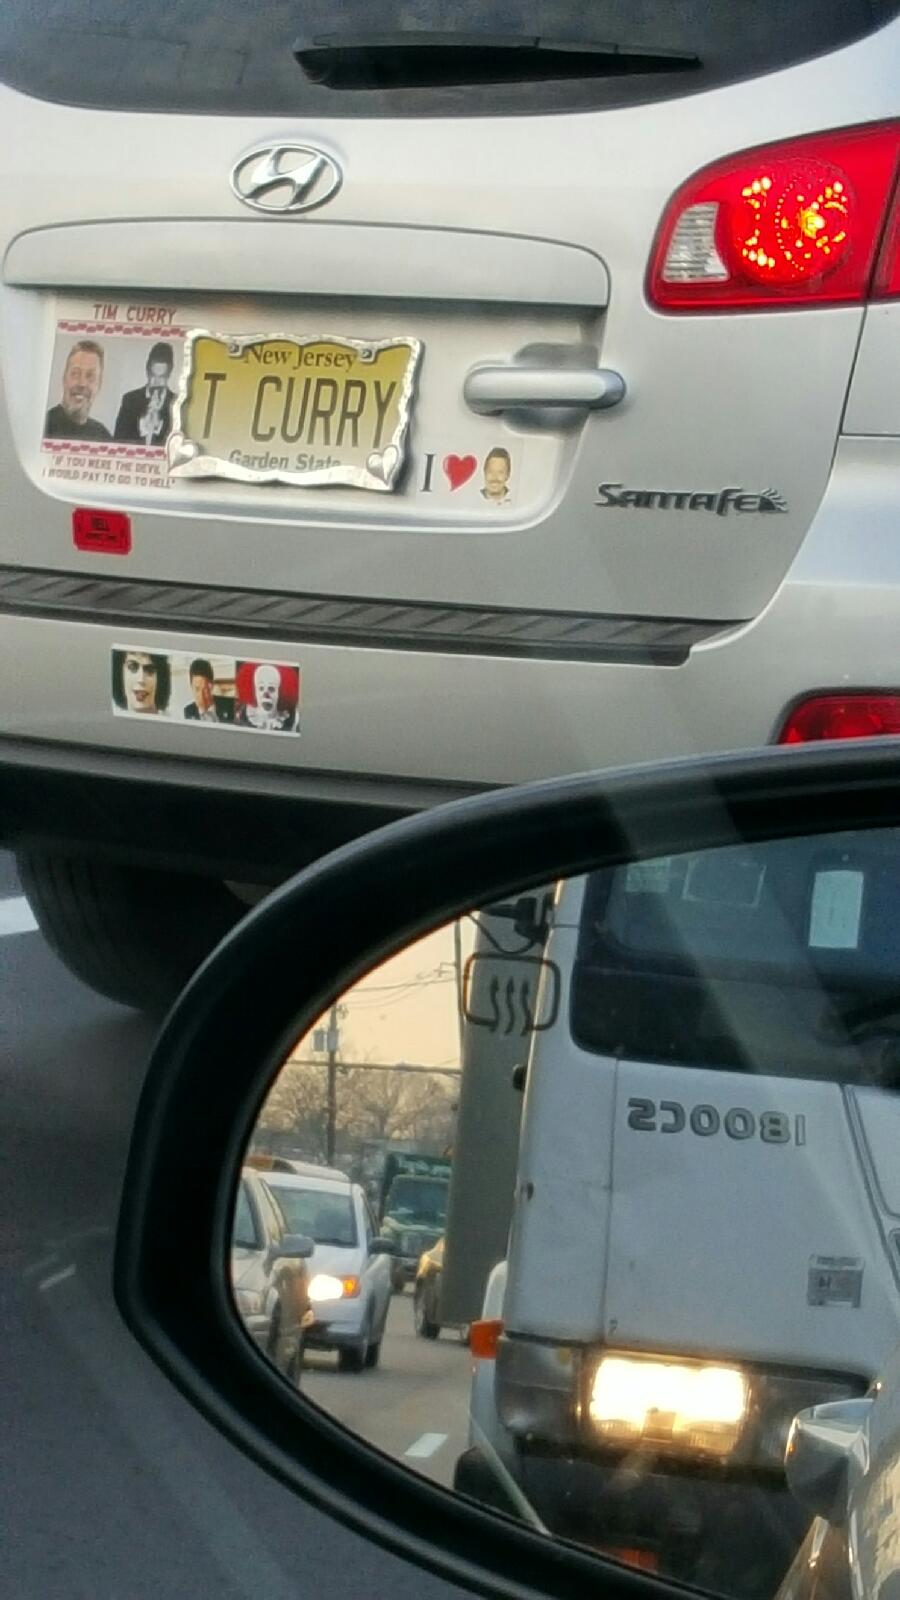 vehicle registration plate - Til Curry New Jersey You Were The Deve Ho Pay To Do Tomel Garden State Santatek 230081